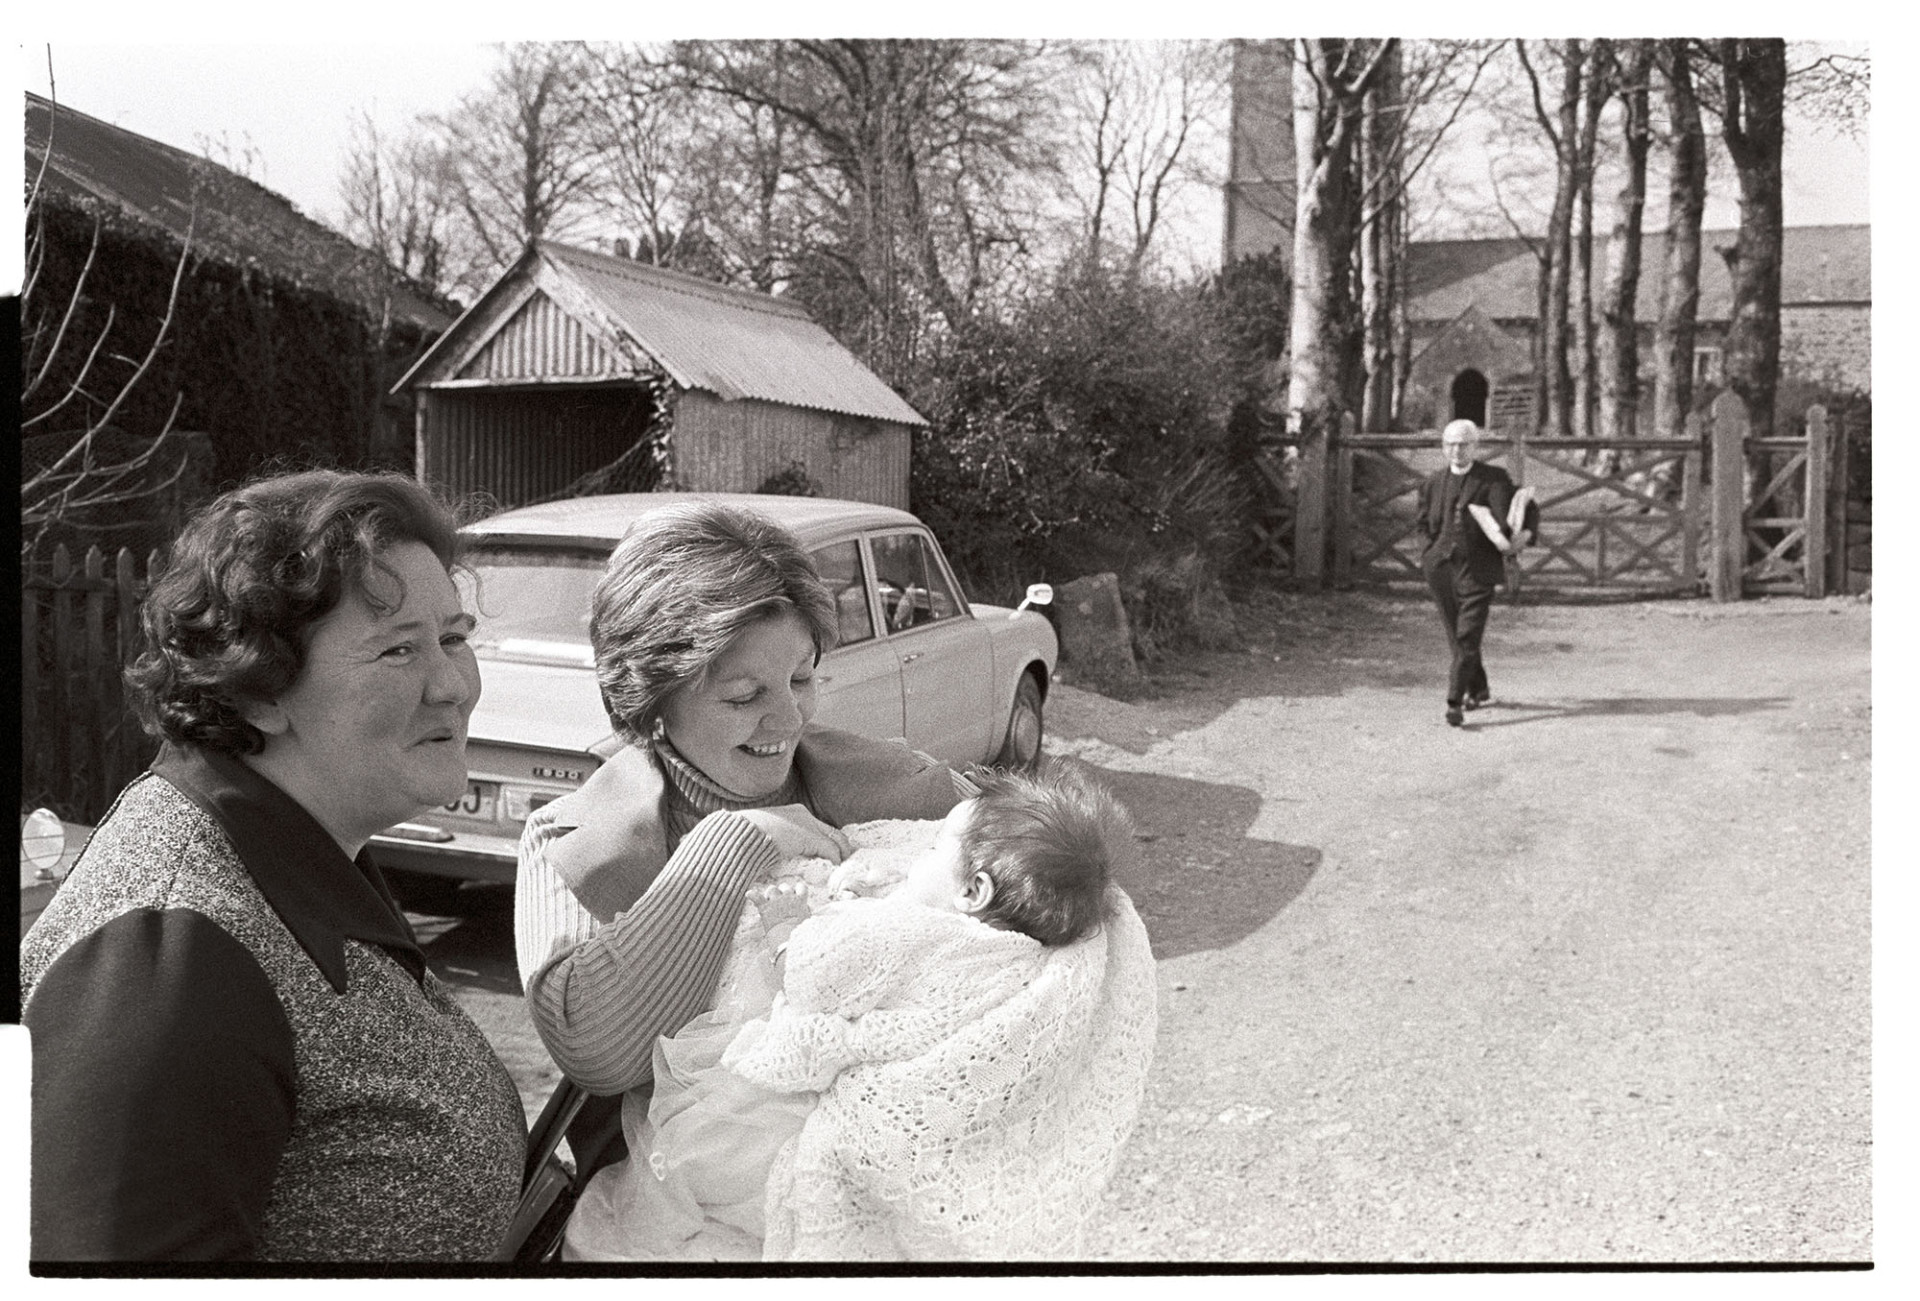 Woman, mother and baby after christening.
[Anne Vallance, stood on the left, with a mother and baby after the baptism of the baby. Inwardleigh church is in the background, with the vicar walking towards them.]